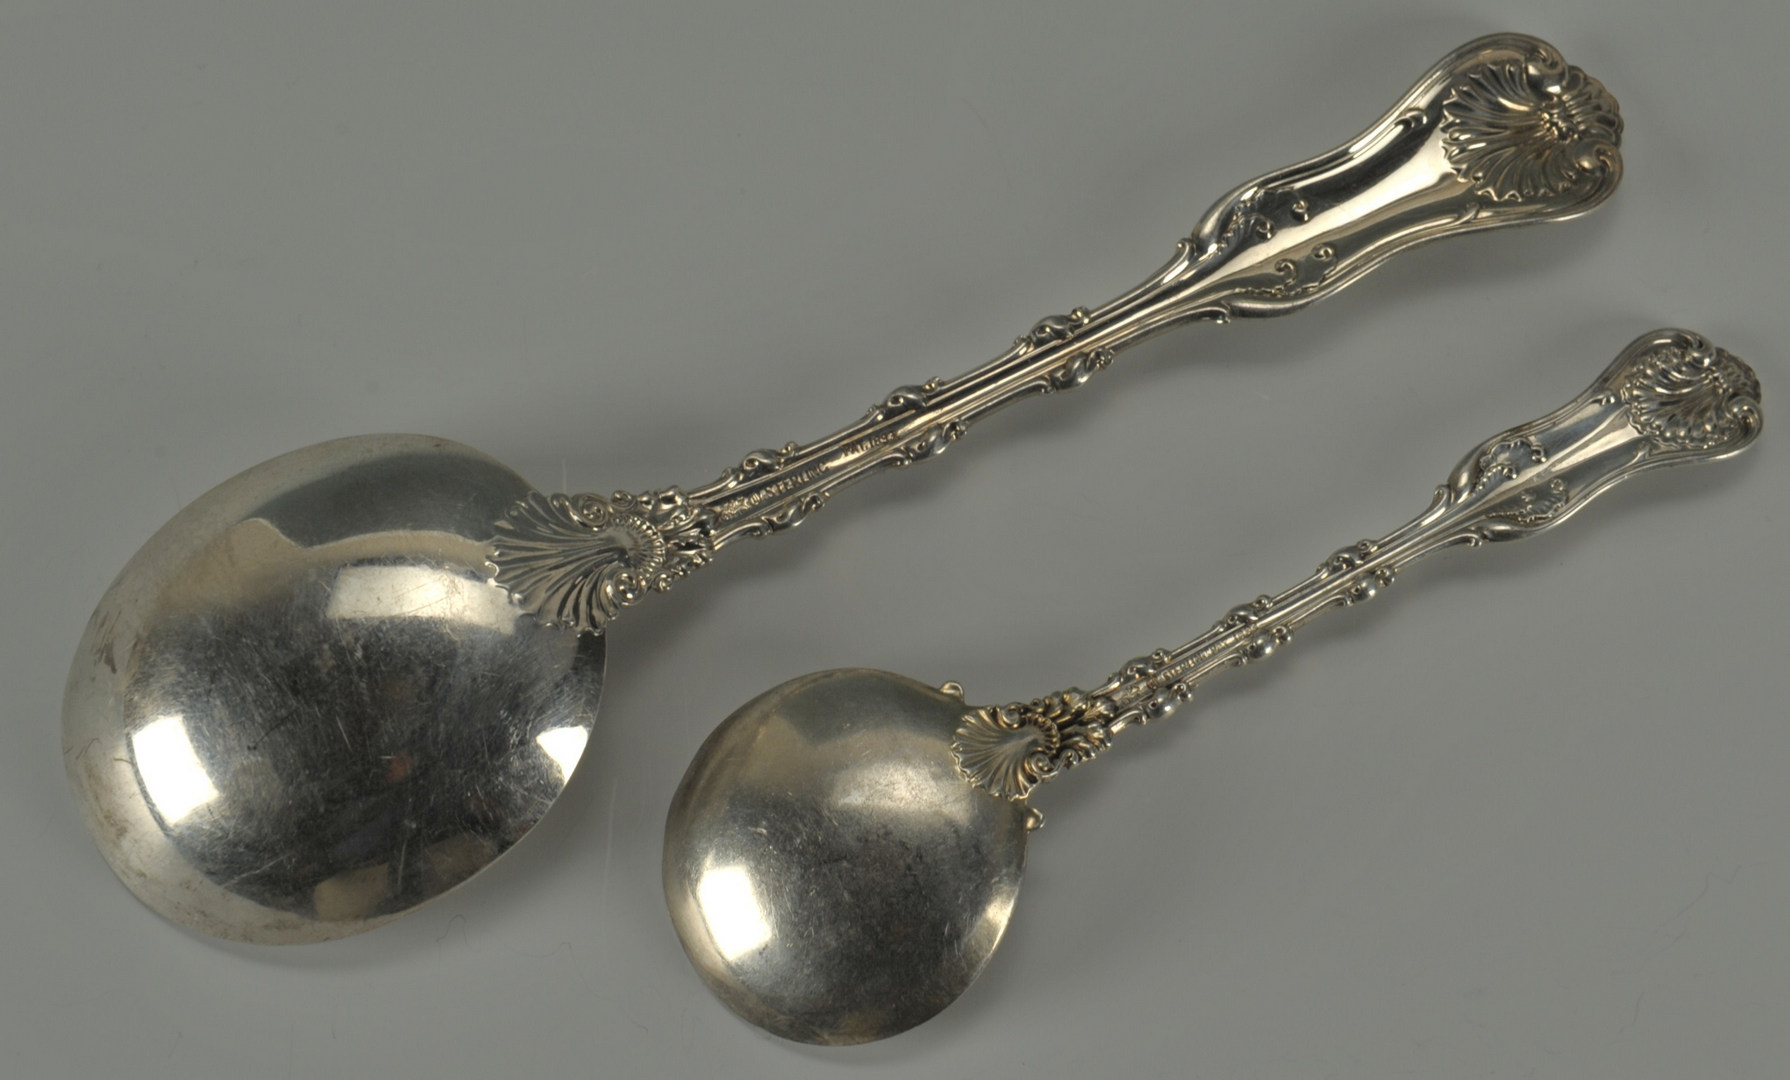 Lot 511: 12 Whiting Imperial Queen Gumbo & Cream Spoons